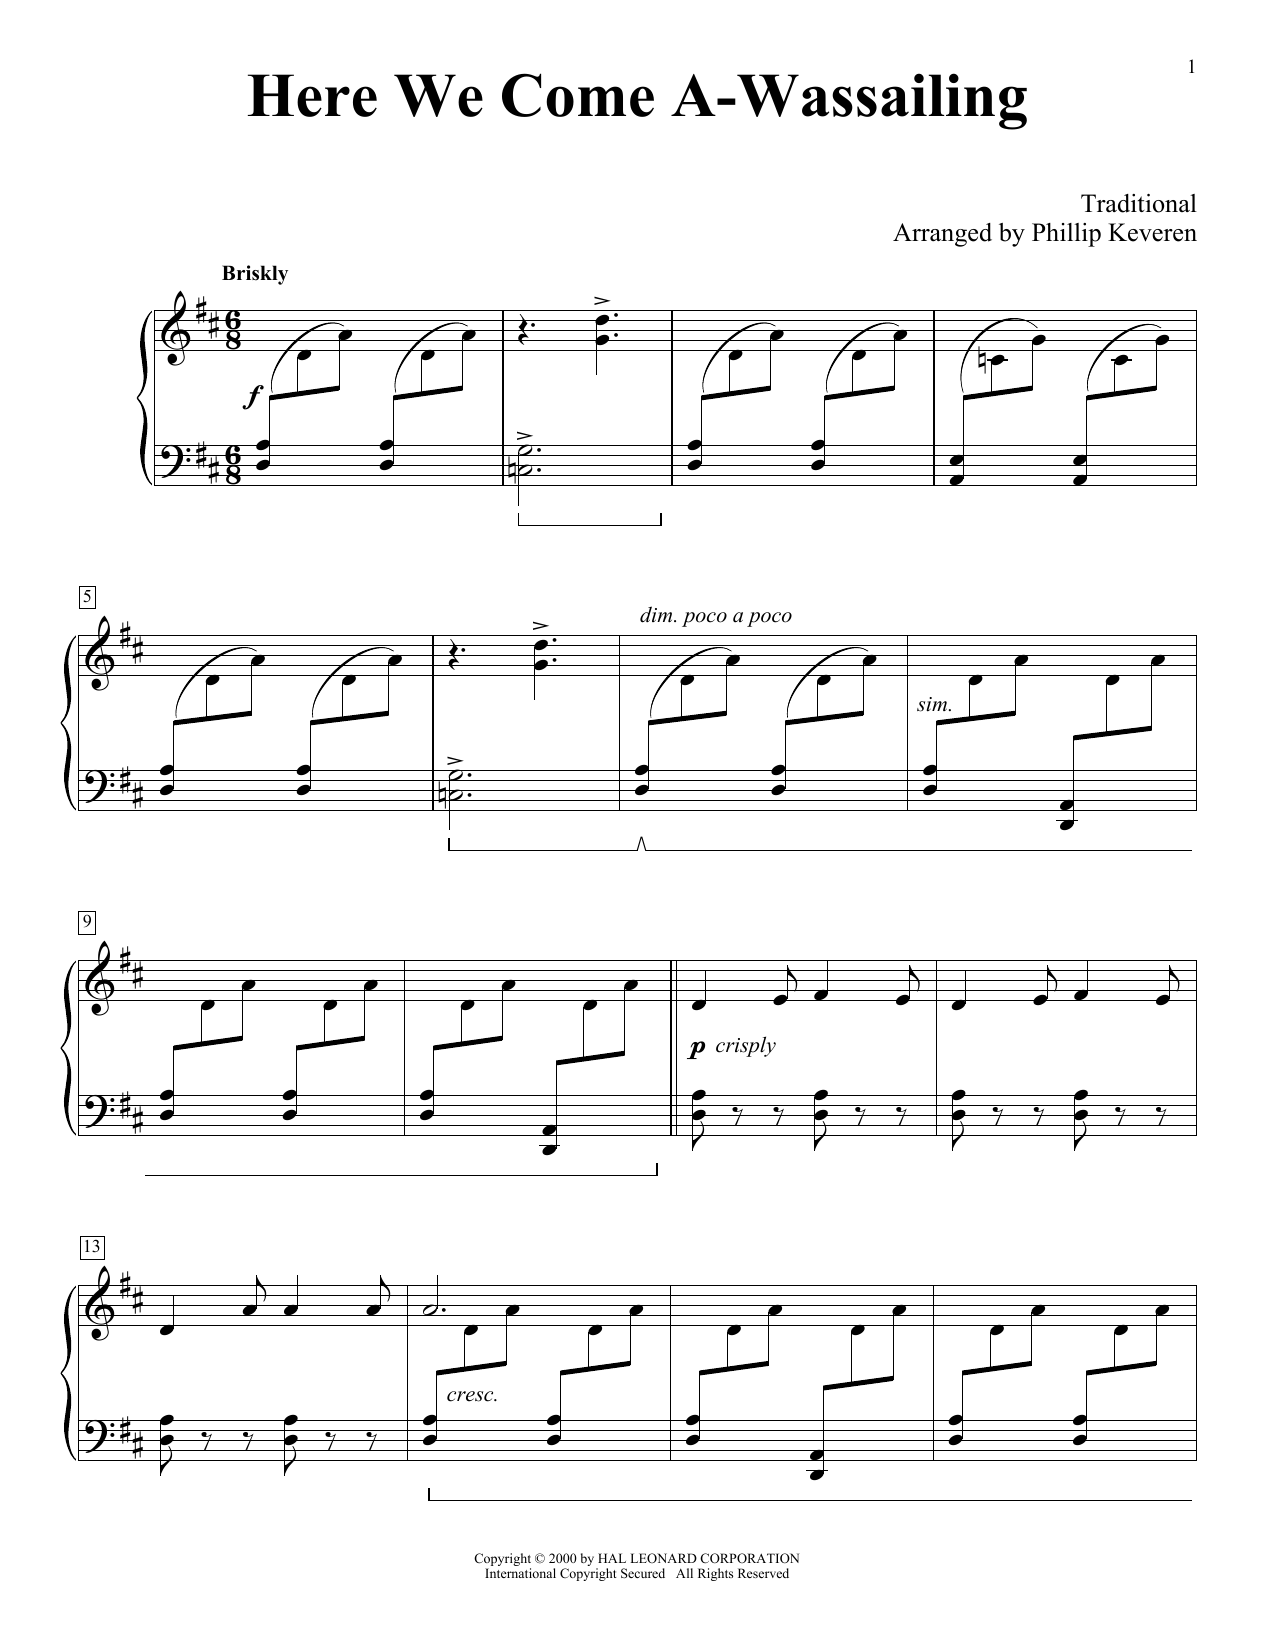 Traditional Here We Come A-Wassailing (arr. Phillip Keveren) sheet music notes printable PDF score